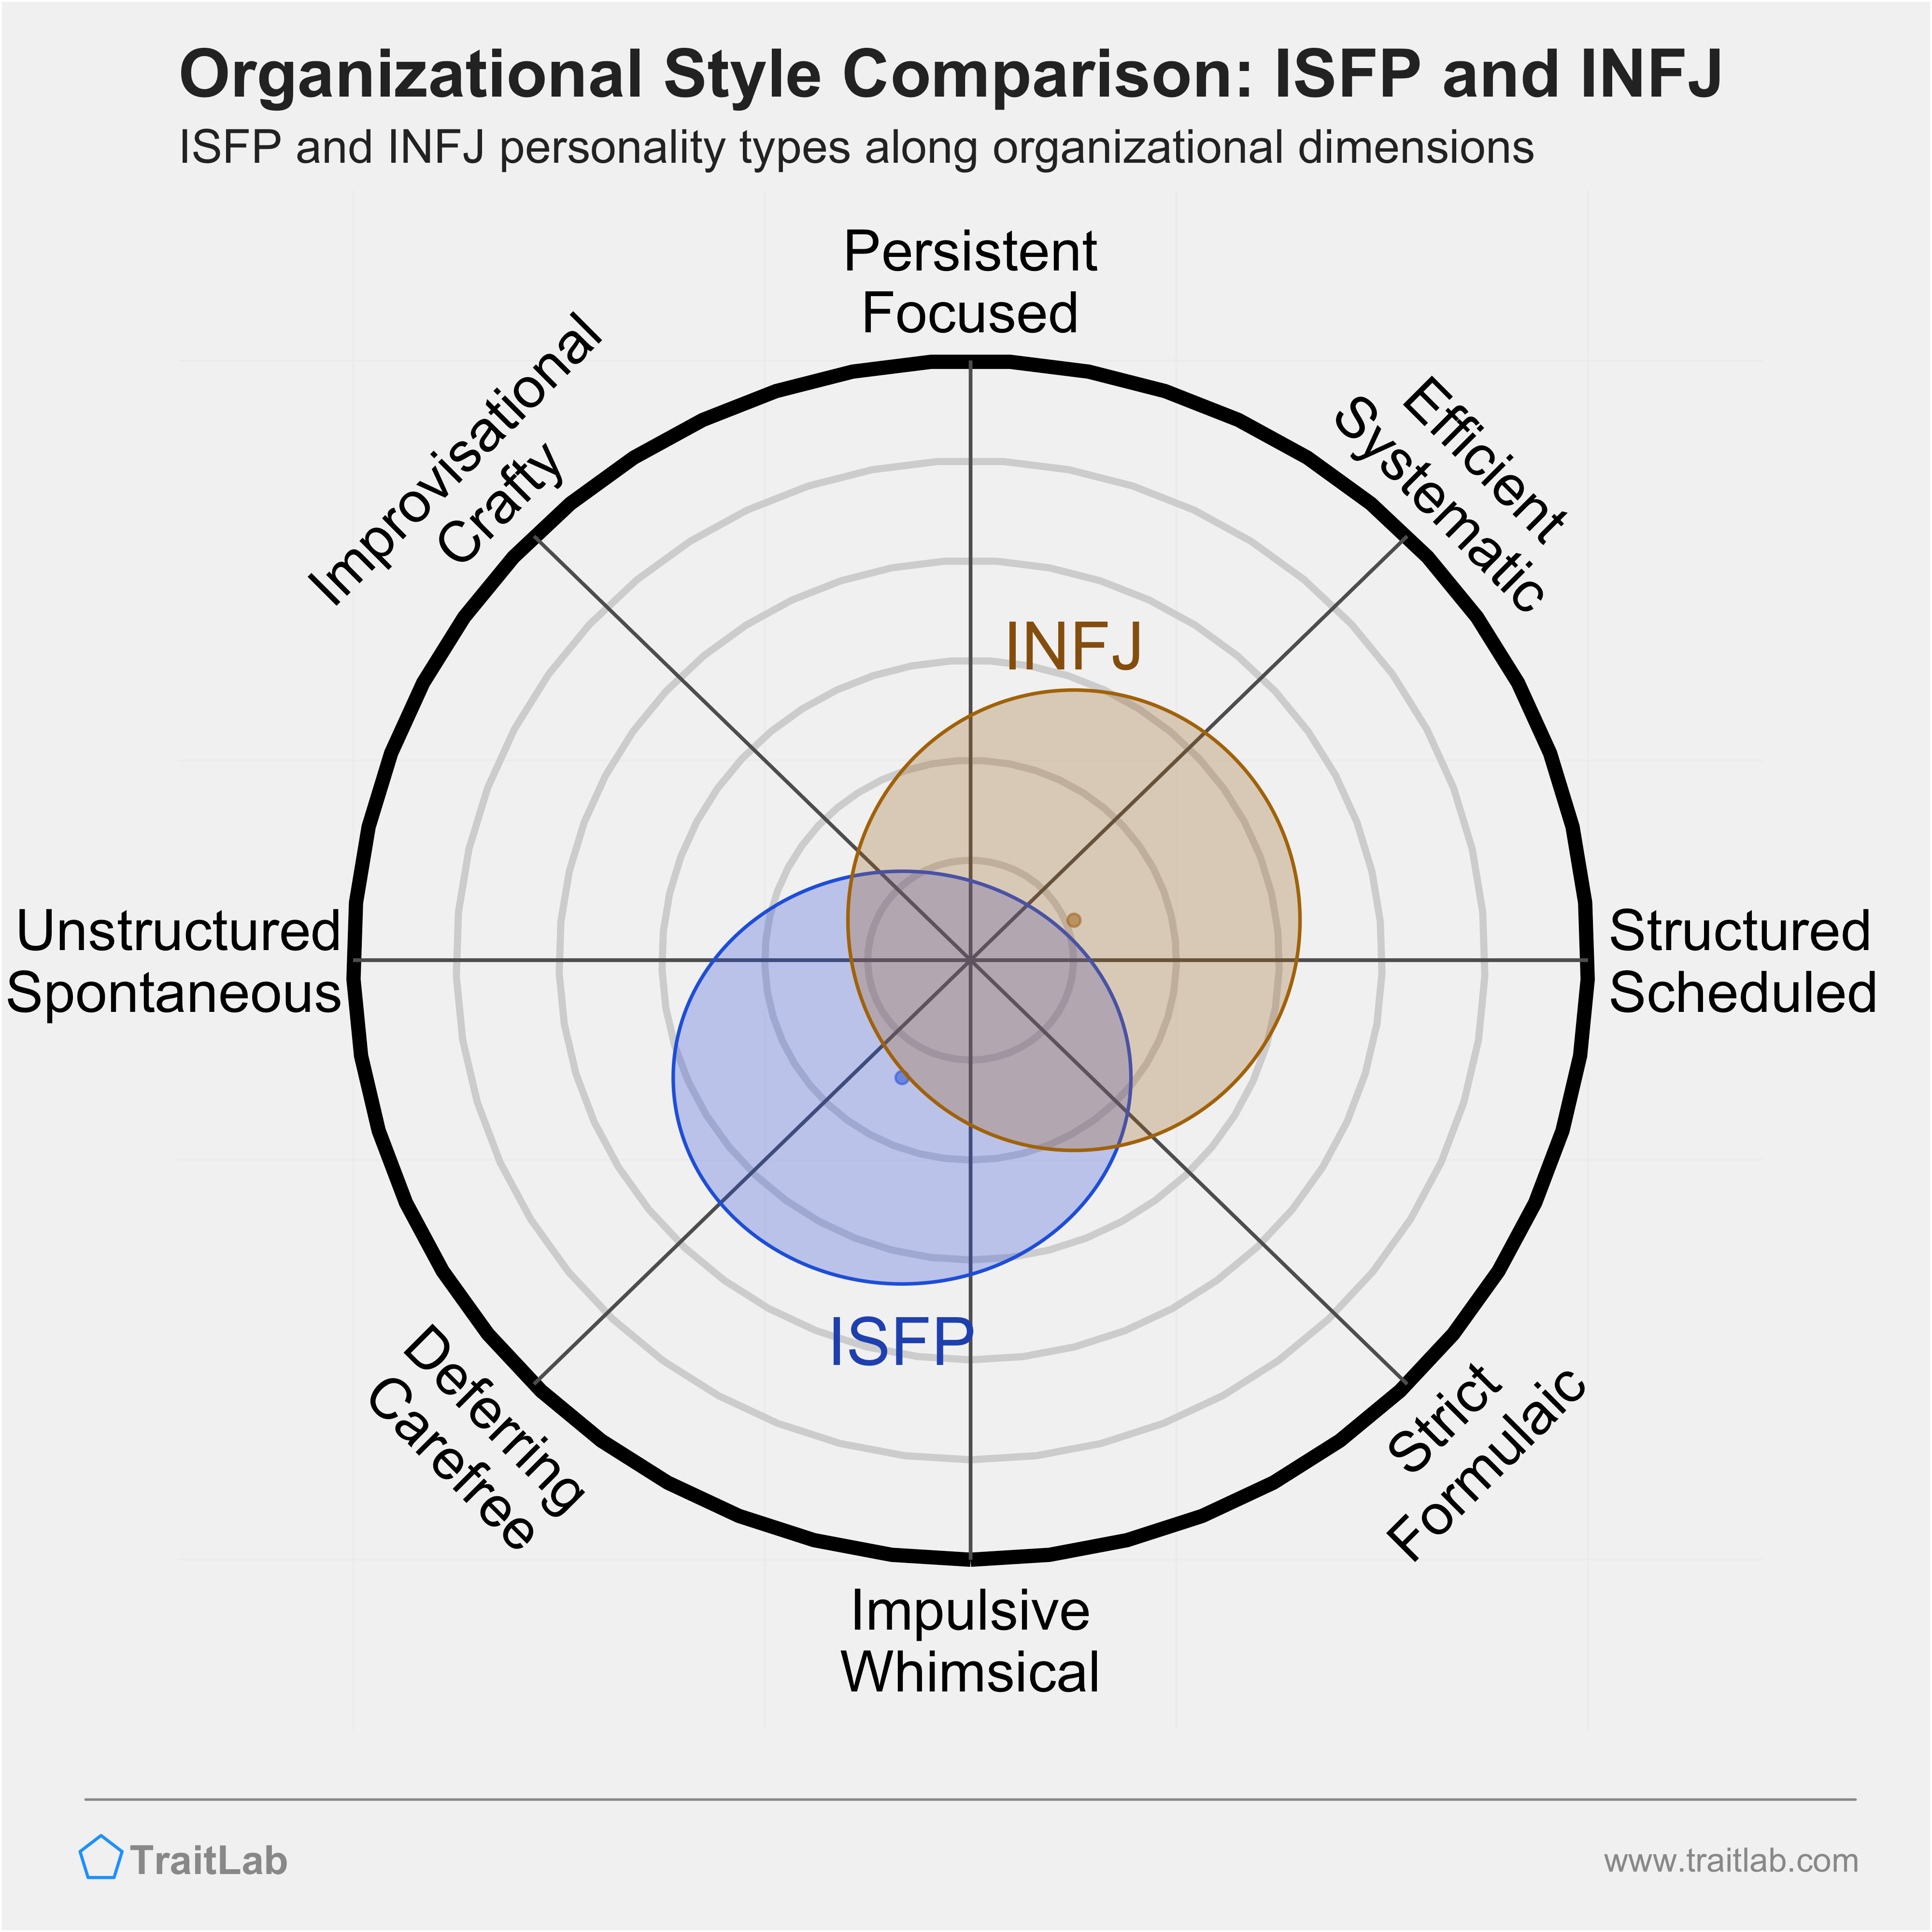 ISFP and INFJ comparison across organizational dimensions